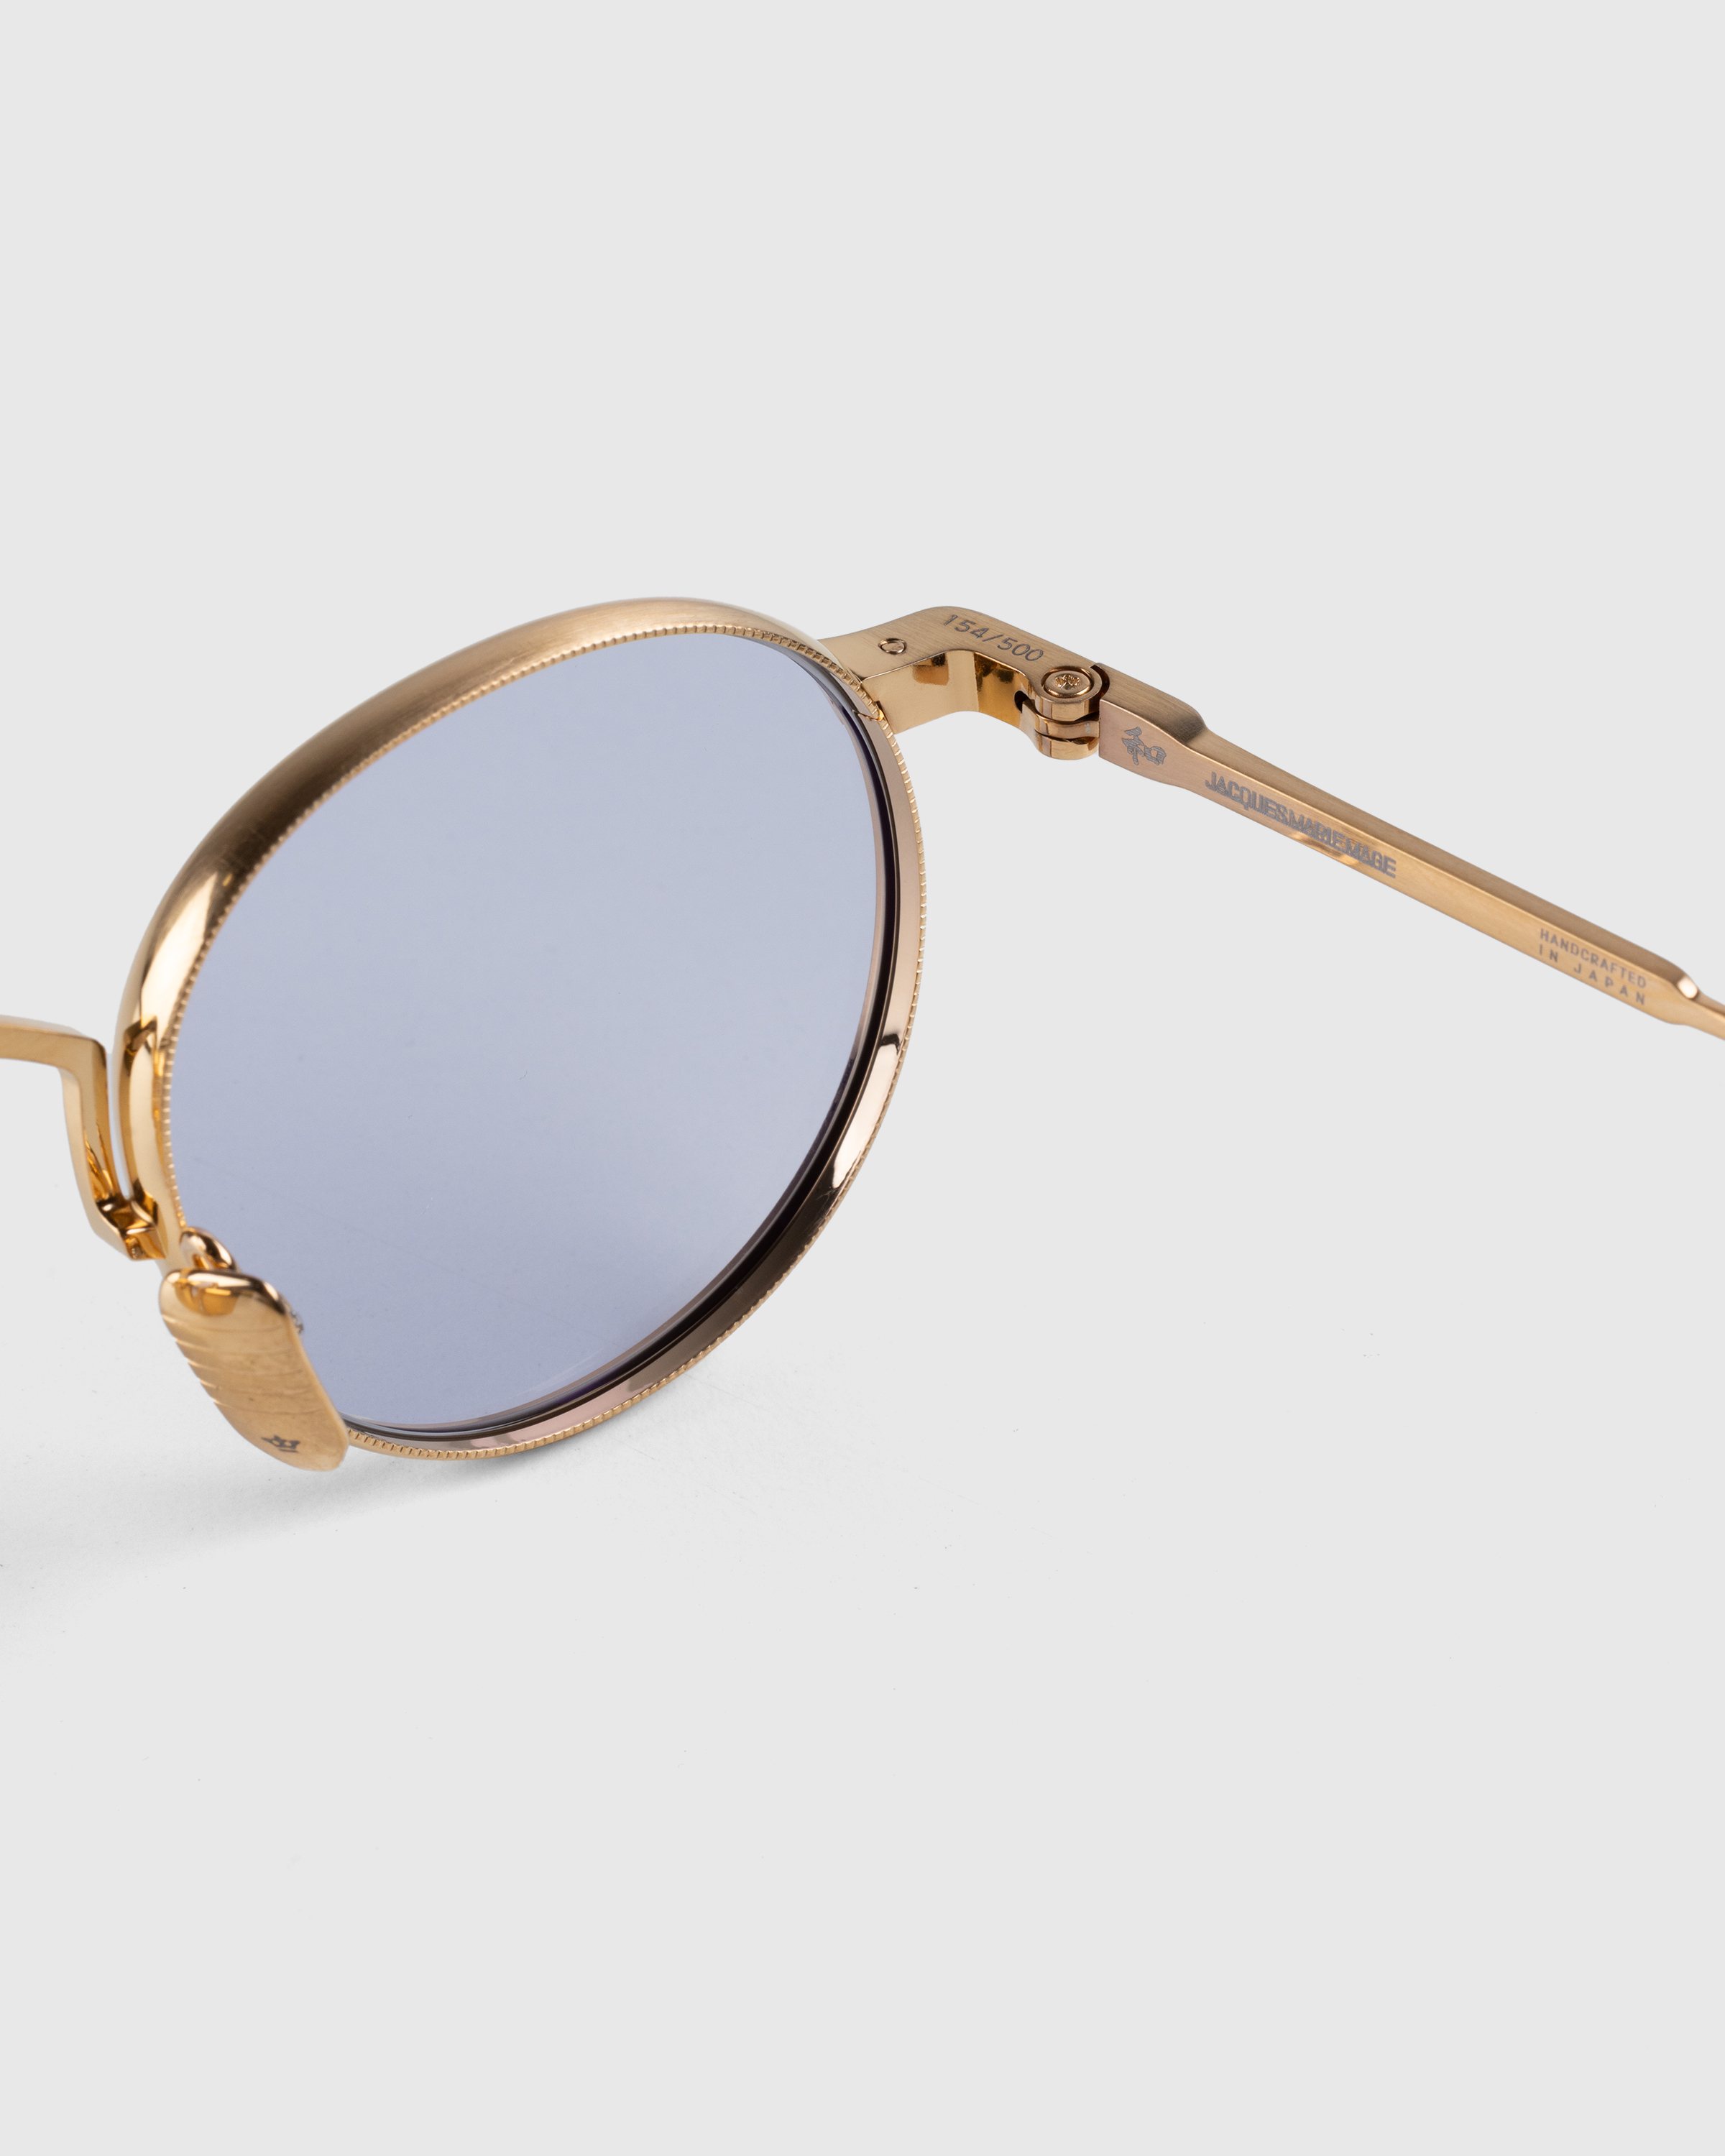 Jacques Marie Mage – Full Metal Jacket Gold - Sunglasses - Gold - Image 4